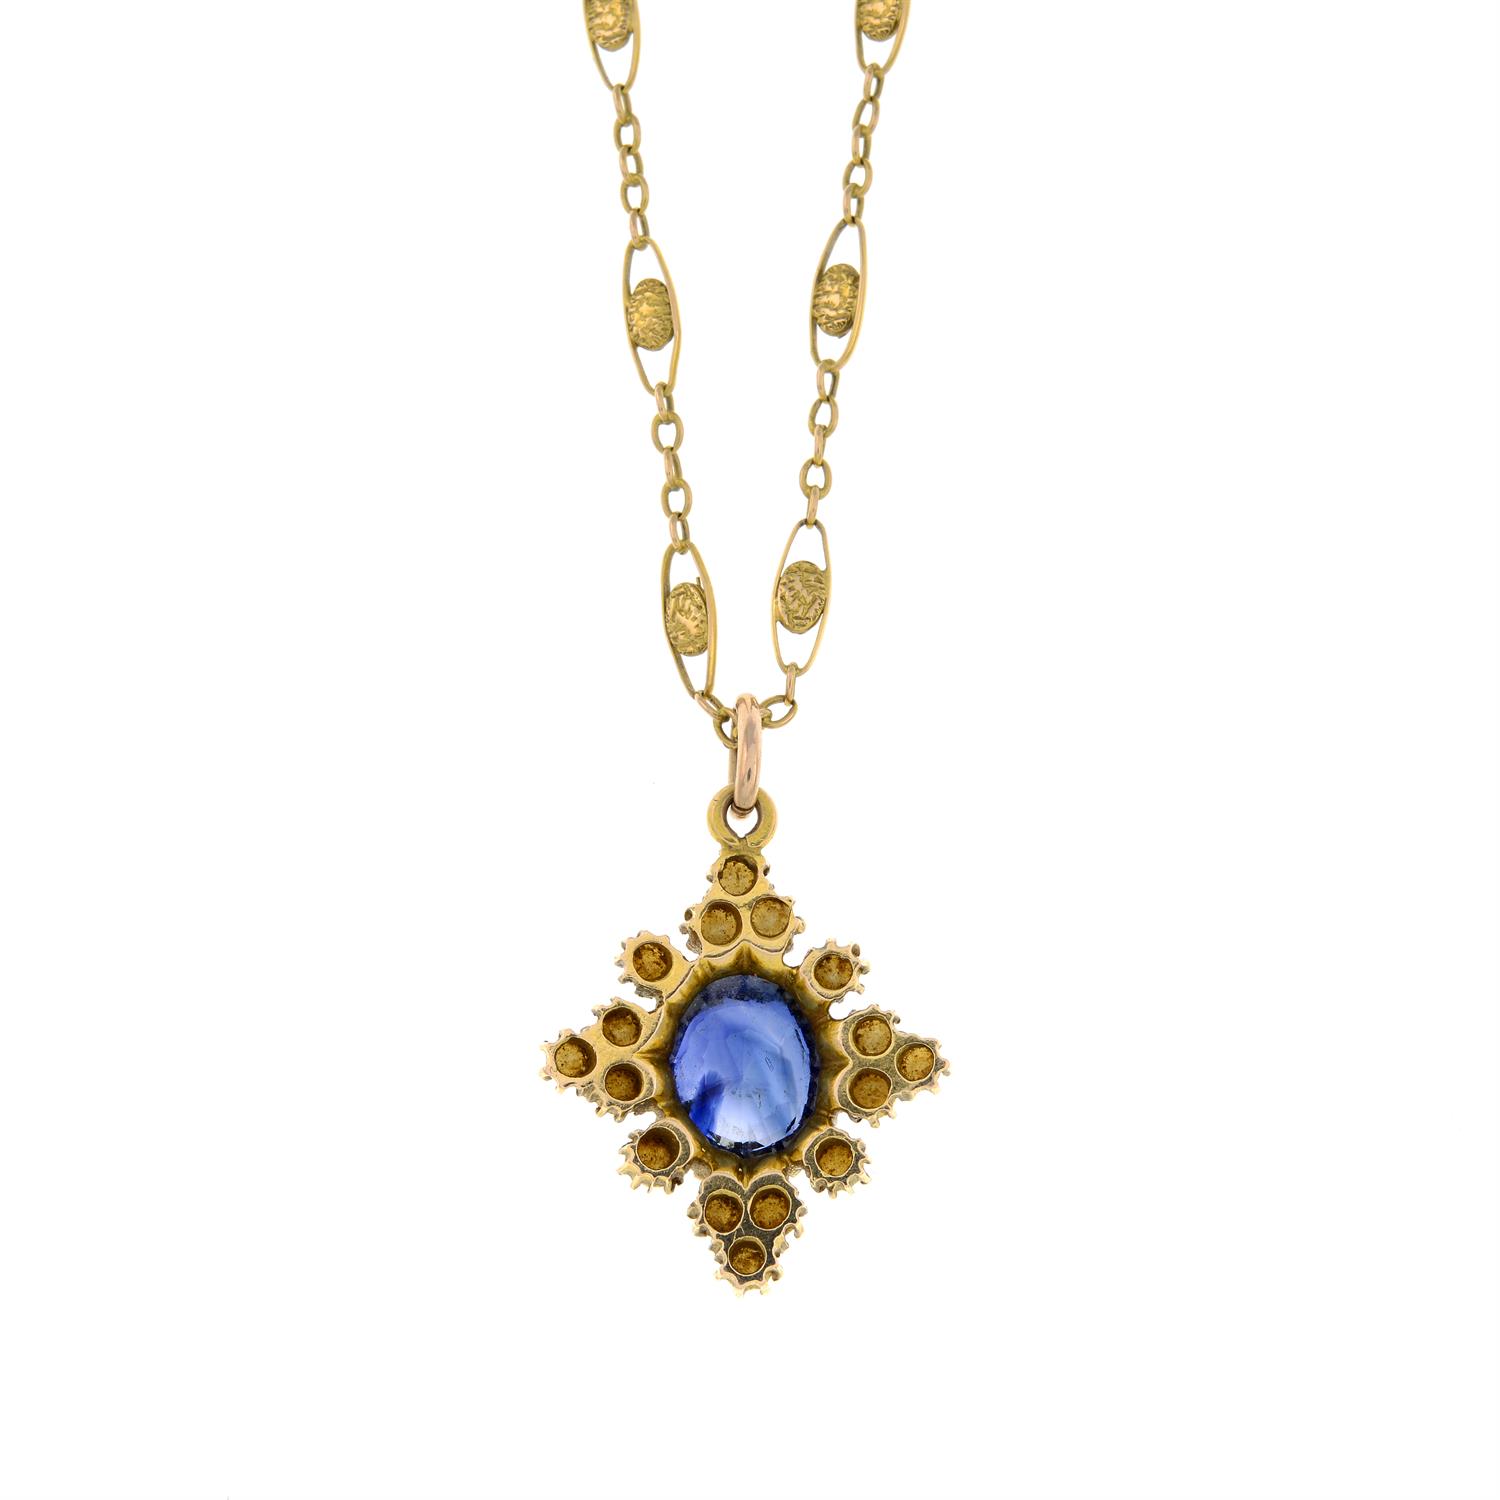 15ct gold sapphire and split pearl pendant and chain - Image 3 of 6